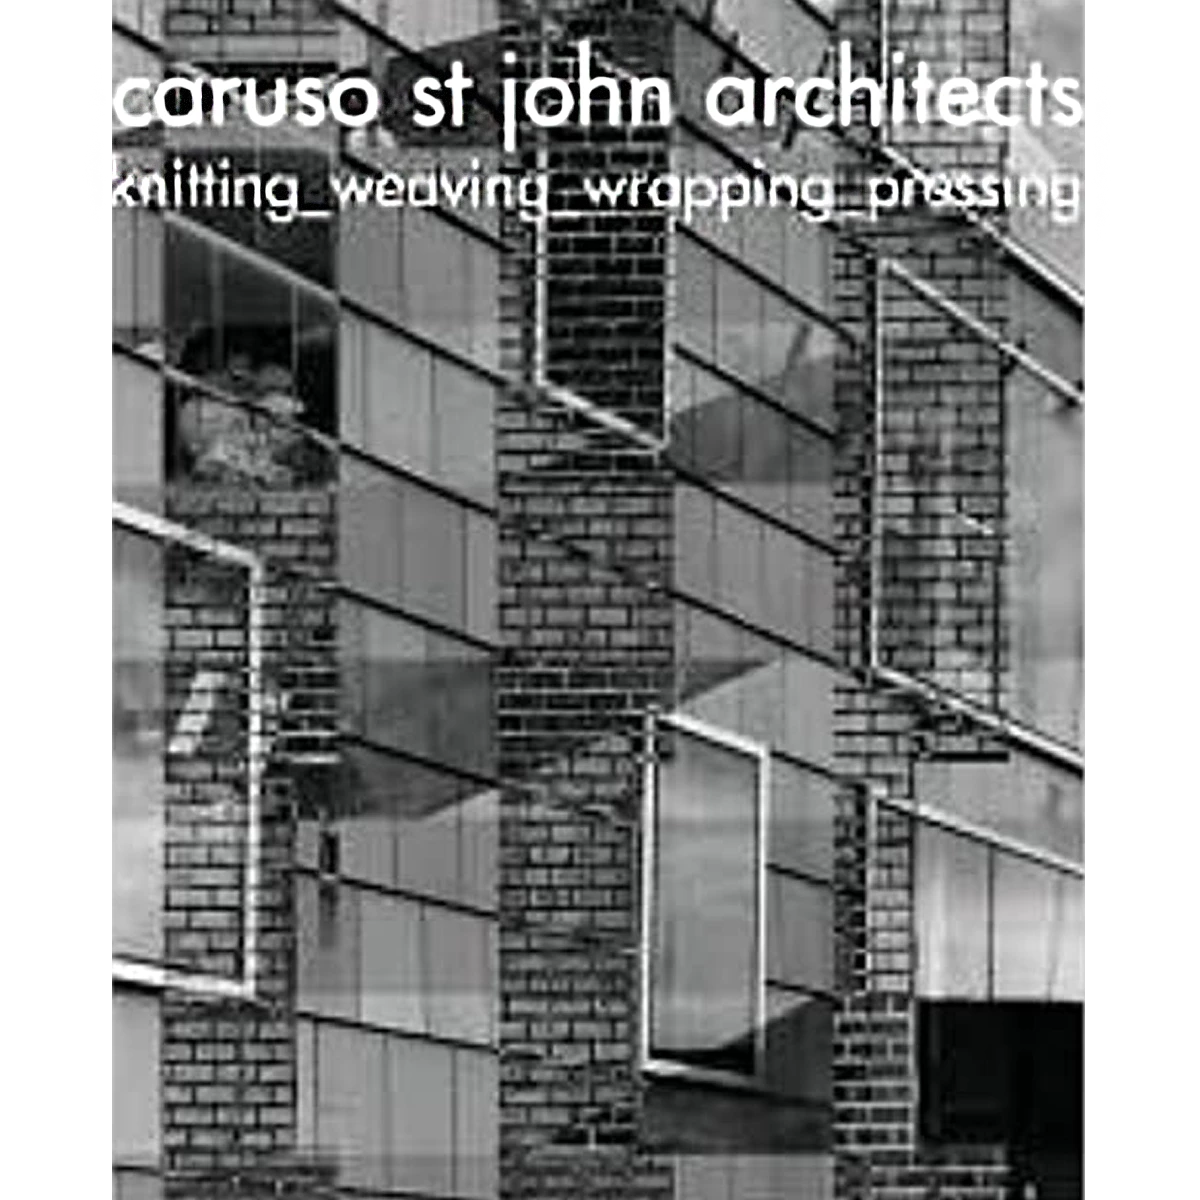 Caruso St. JohnArchitects